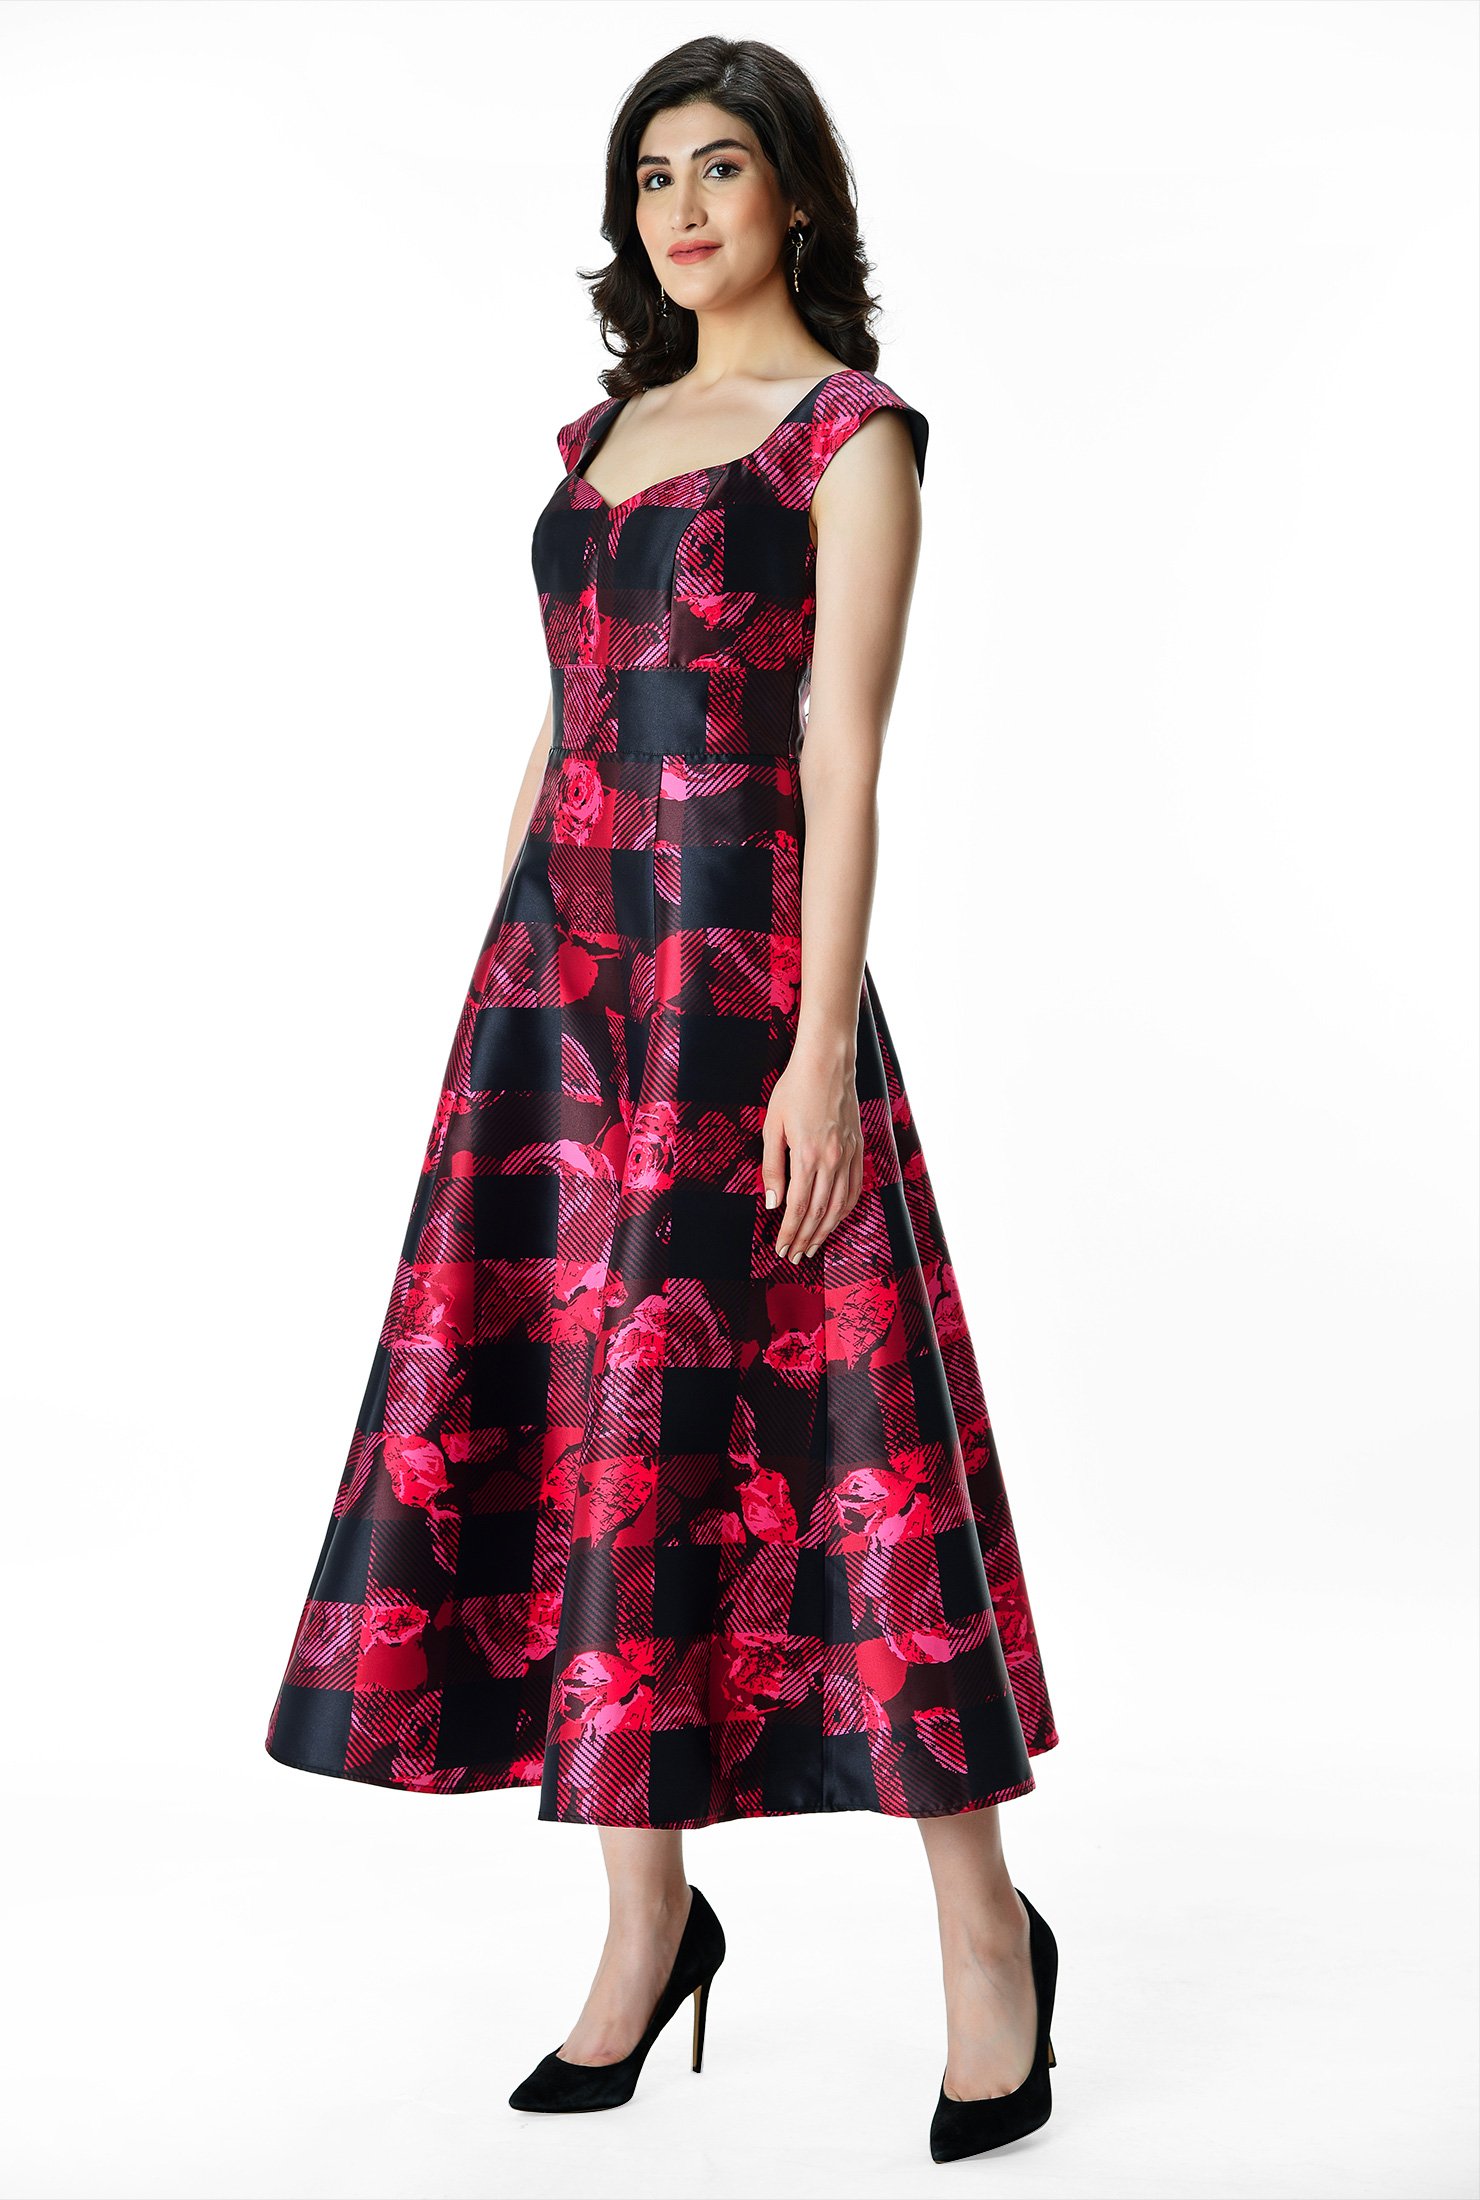 A standout for special occasions with its elegant silhouette, our floral and check print dress is styled with a princess seamed bodice and full flared skirt.